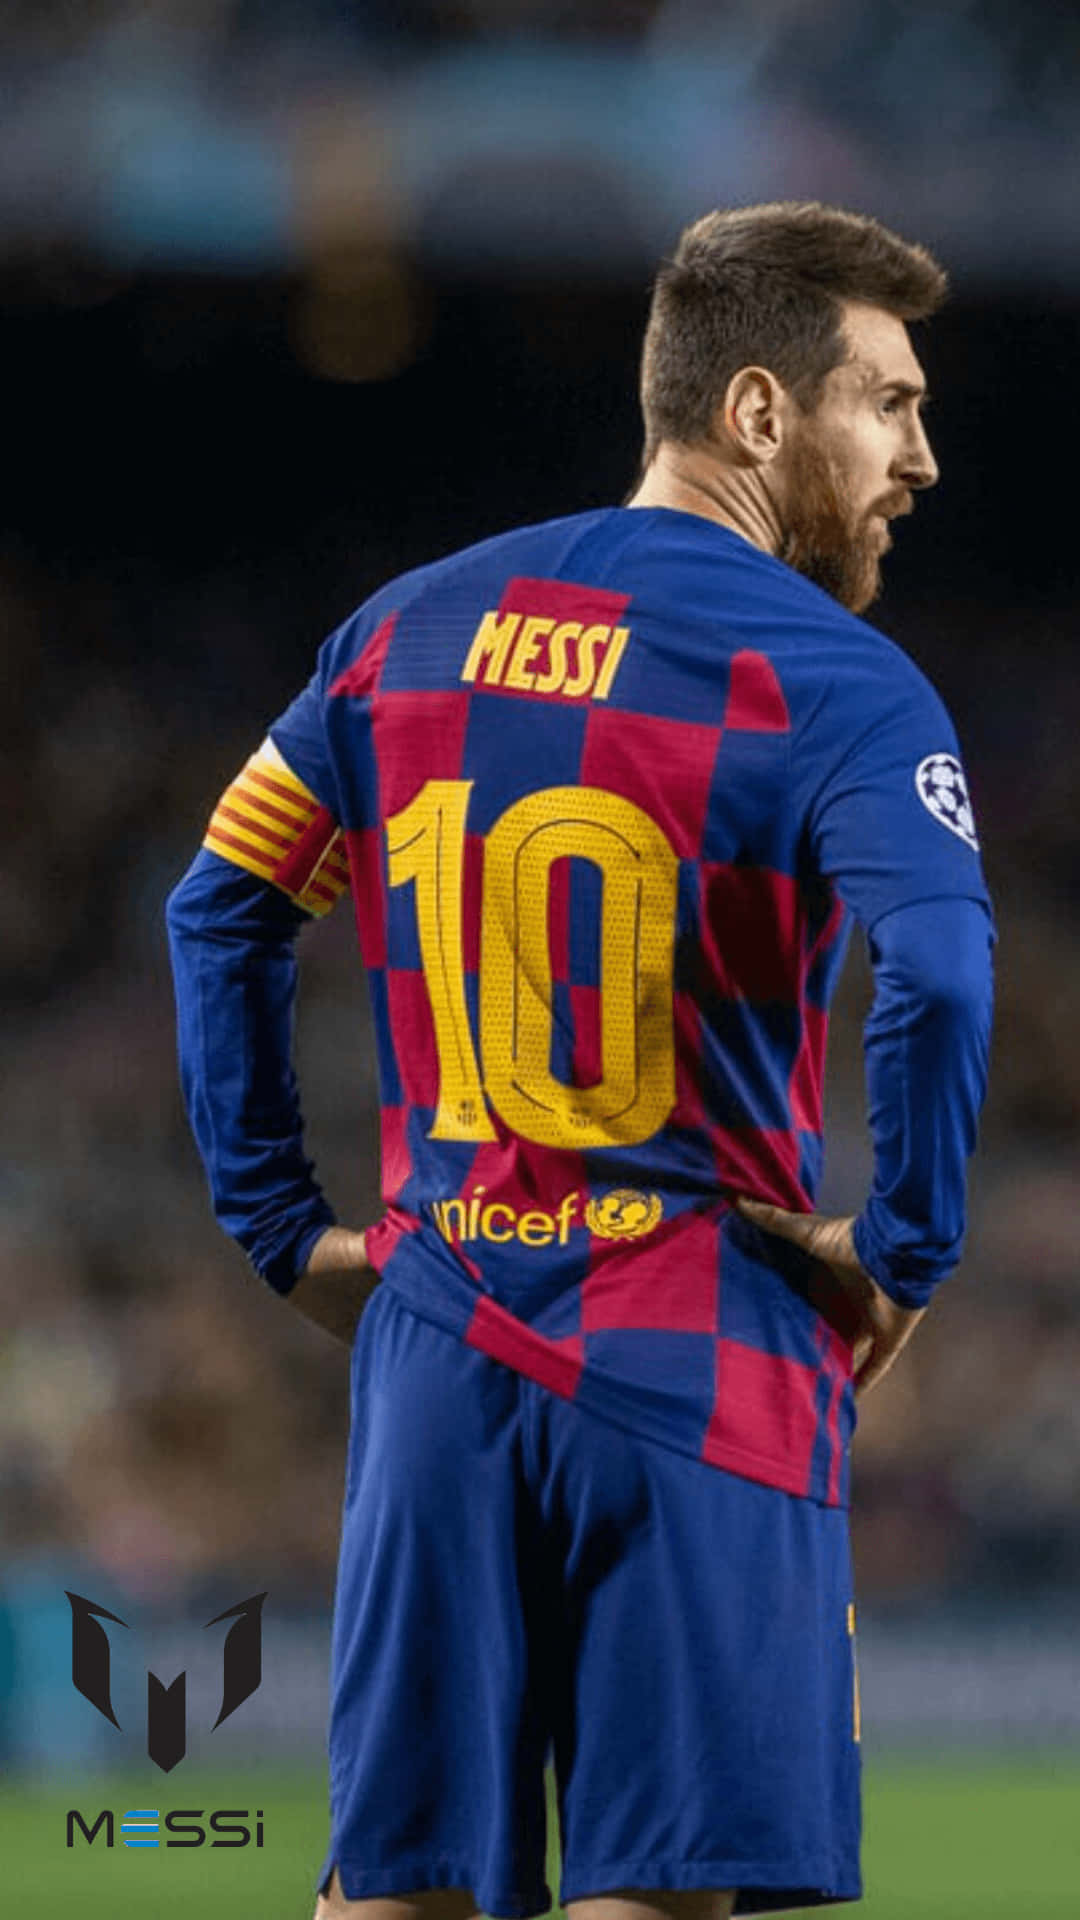 "Messi Cool - Football Legend at the Top of His Game" Wallpaper